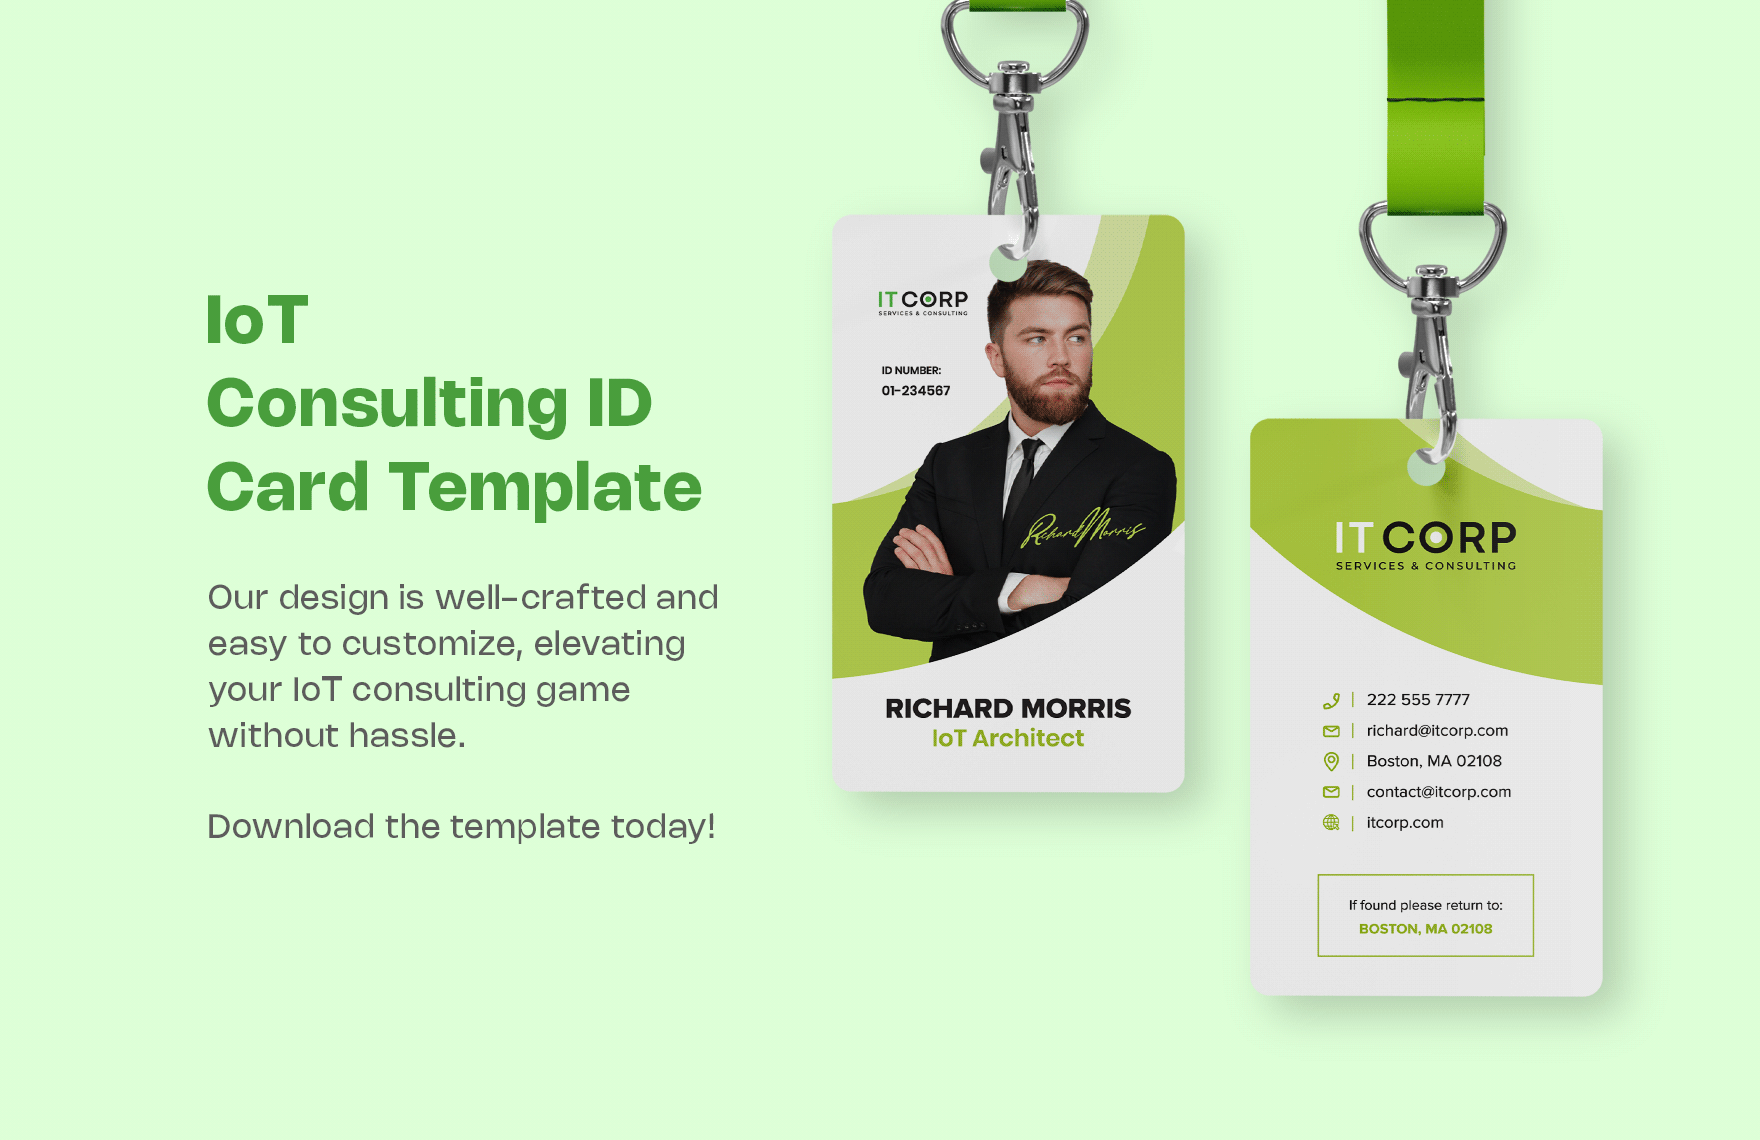 IoT Consulting ID Card Template